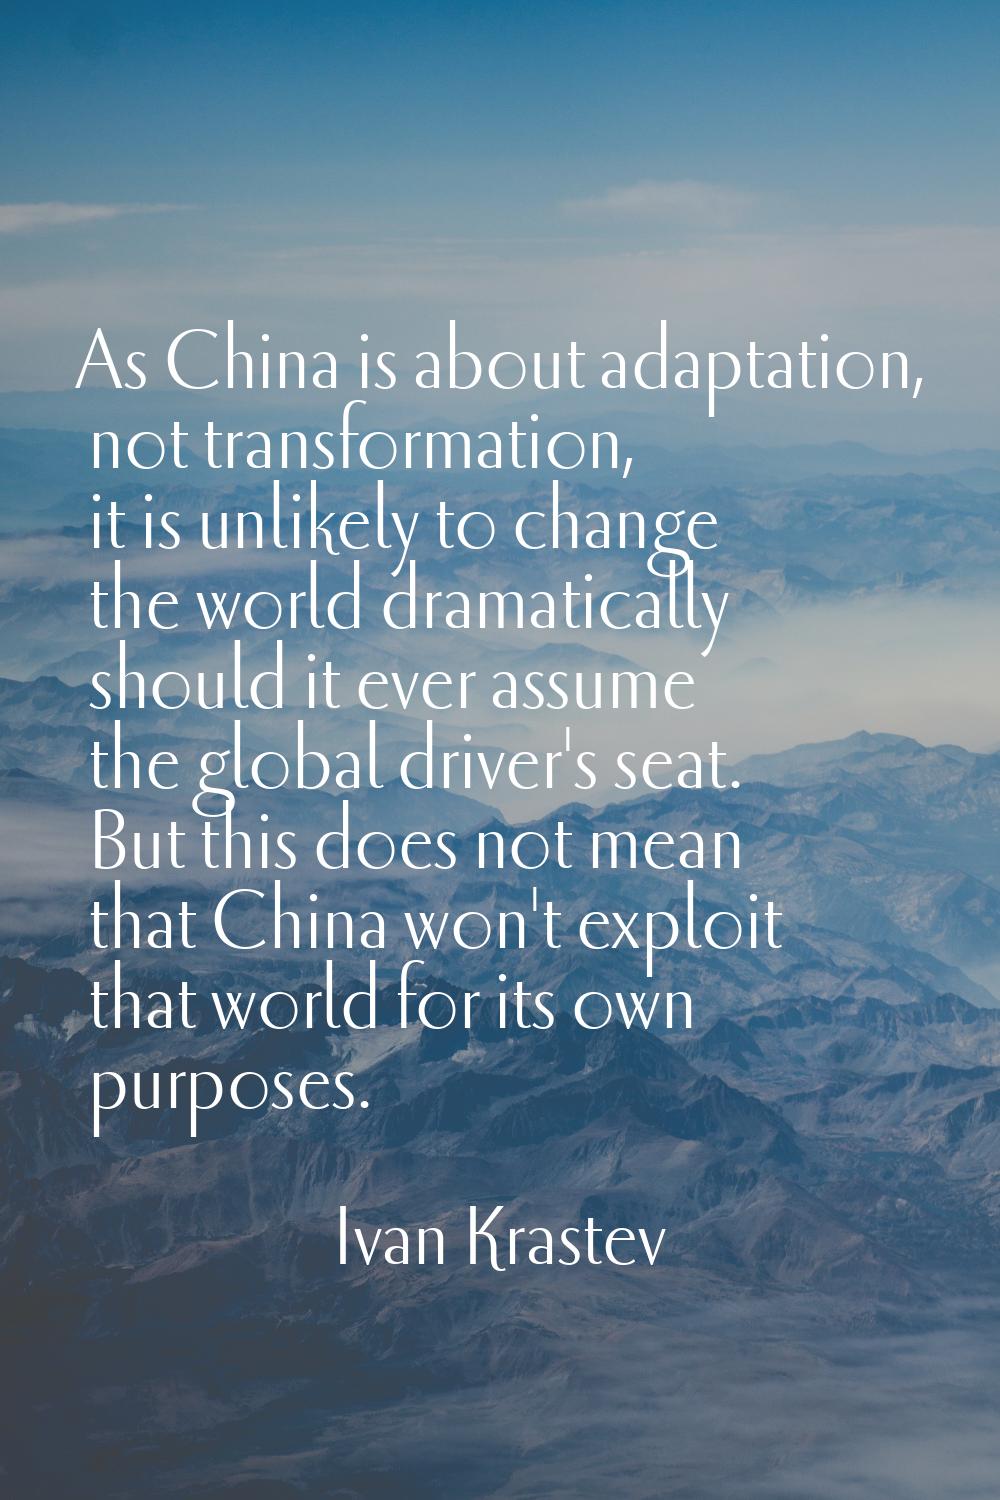 As China is about adaptation, not transformation, it is unlikely to change the world dramatically s